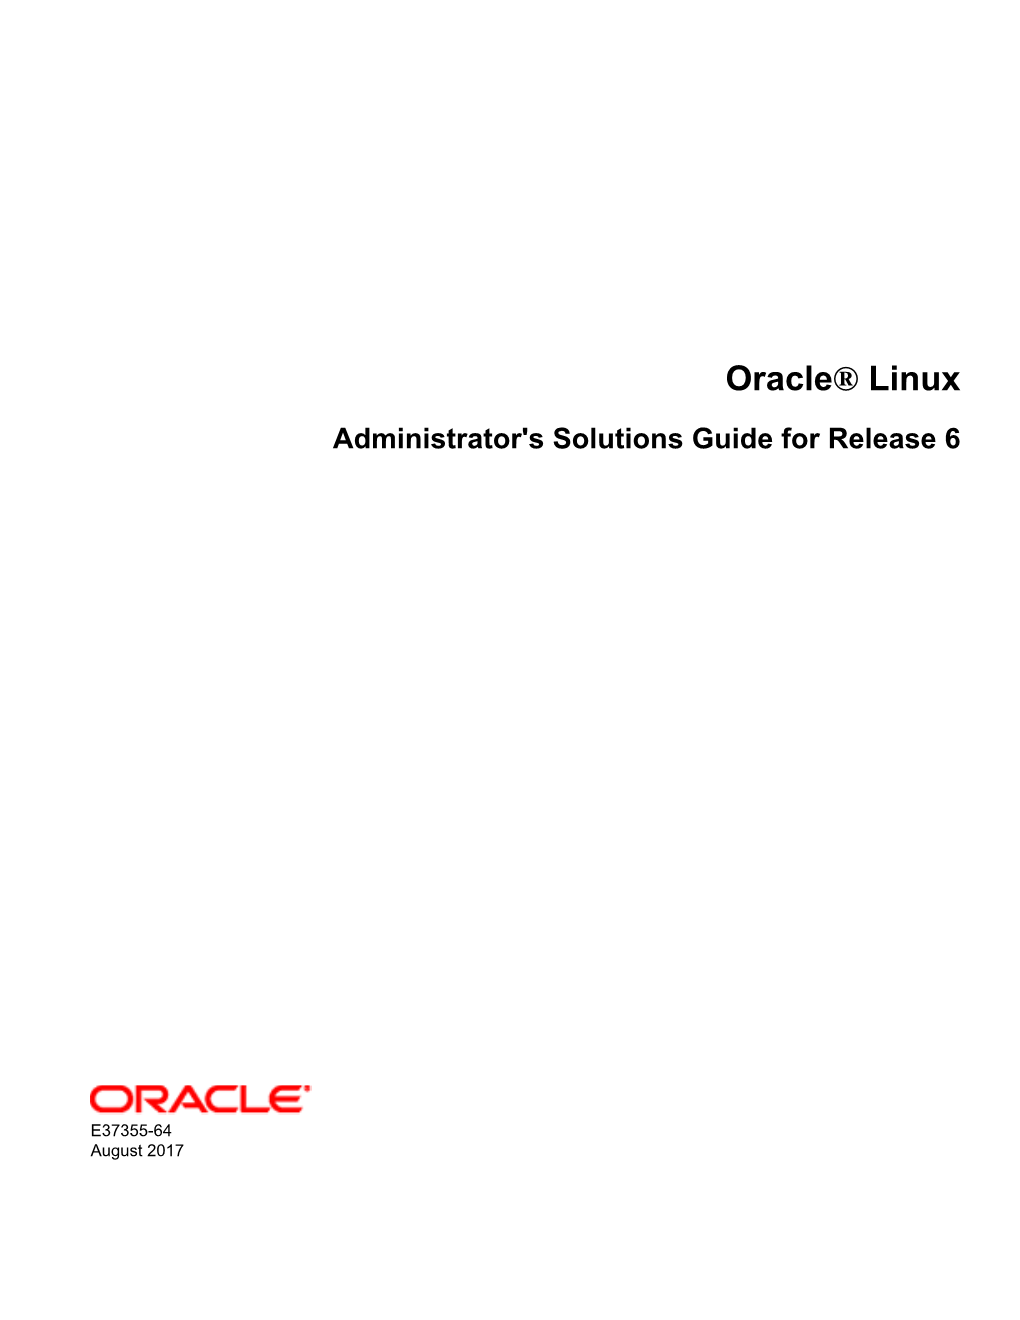 Oracle® Linux Administrator's Solutions Guide for Release 6